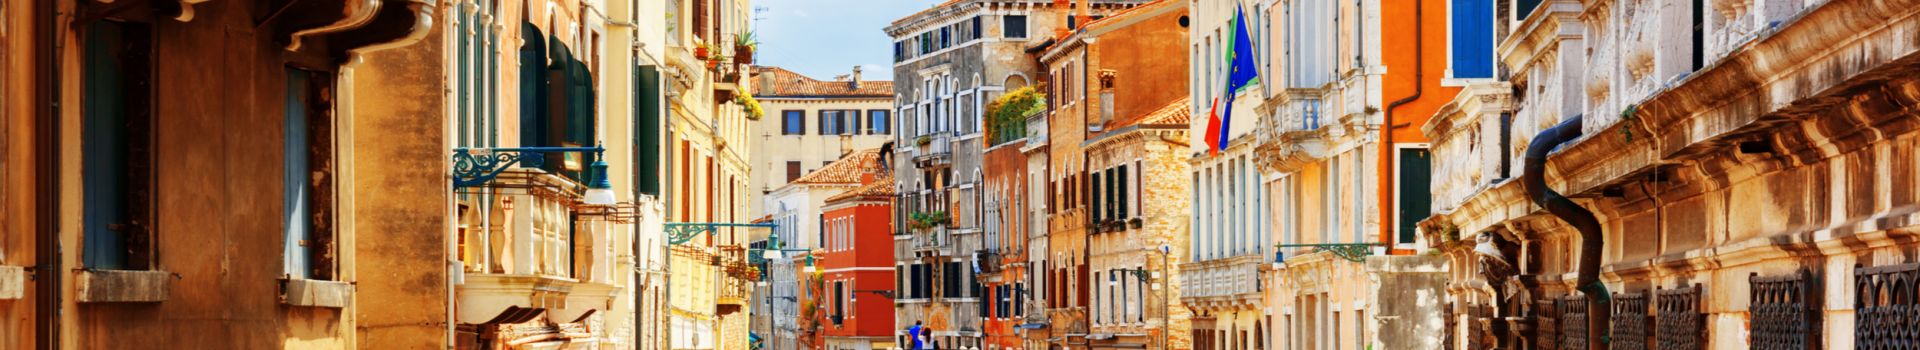 Cheap city breaks to Venice with Cassidy Travel